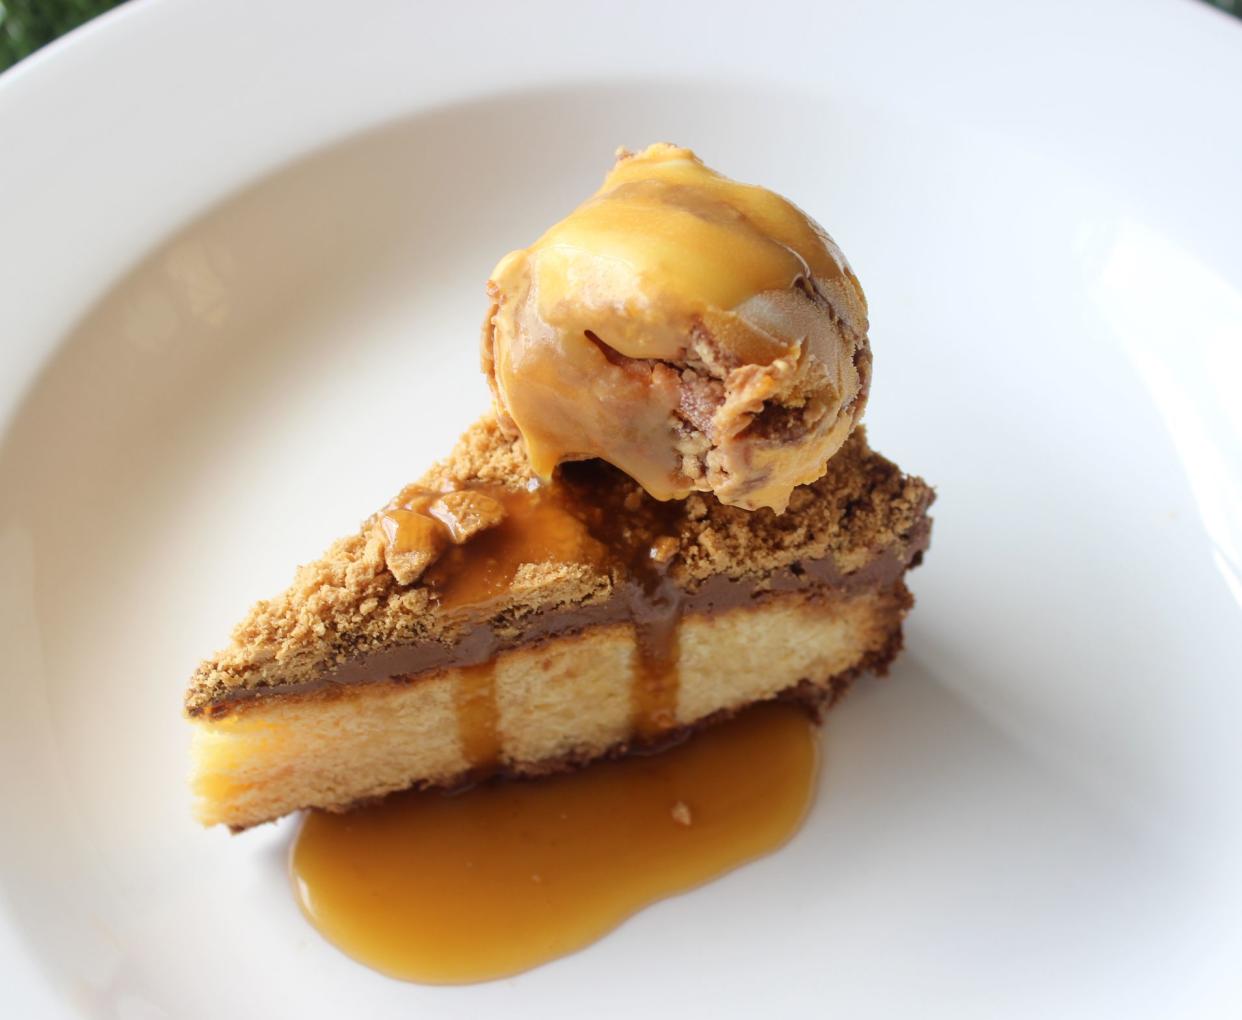 A golden cheesecake with honeycomb crumble, ice-cream and salted caramel